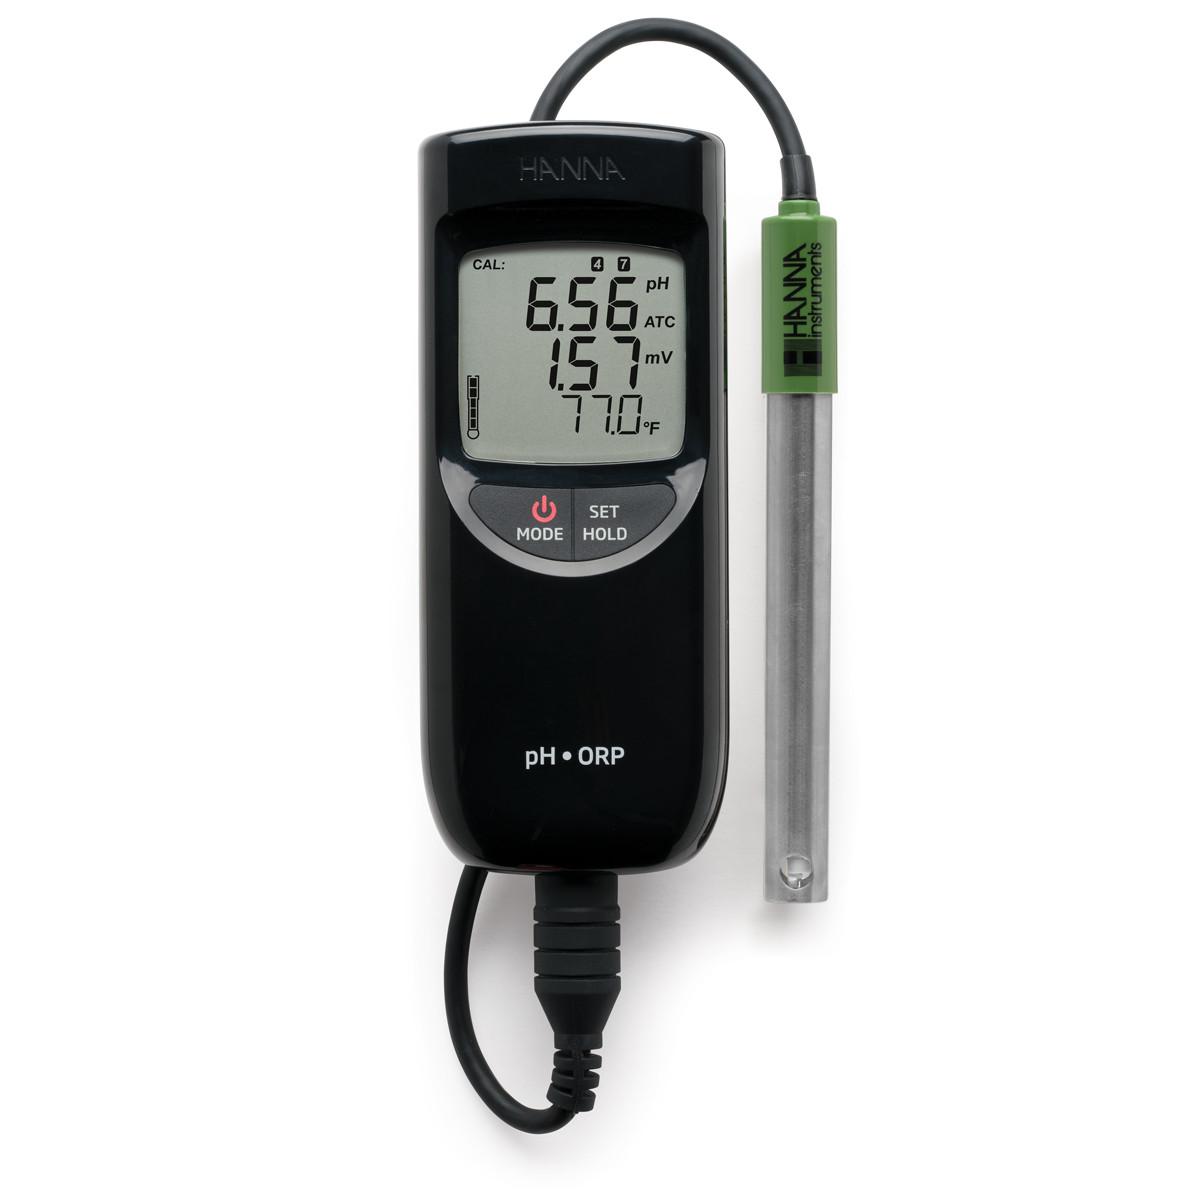 Hanna ORP Meter used for water quality monitoring